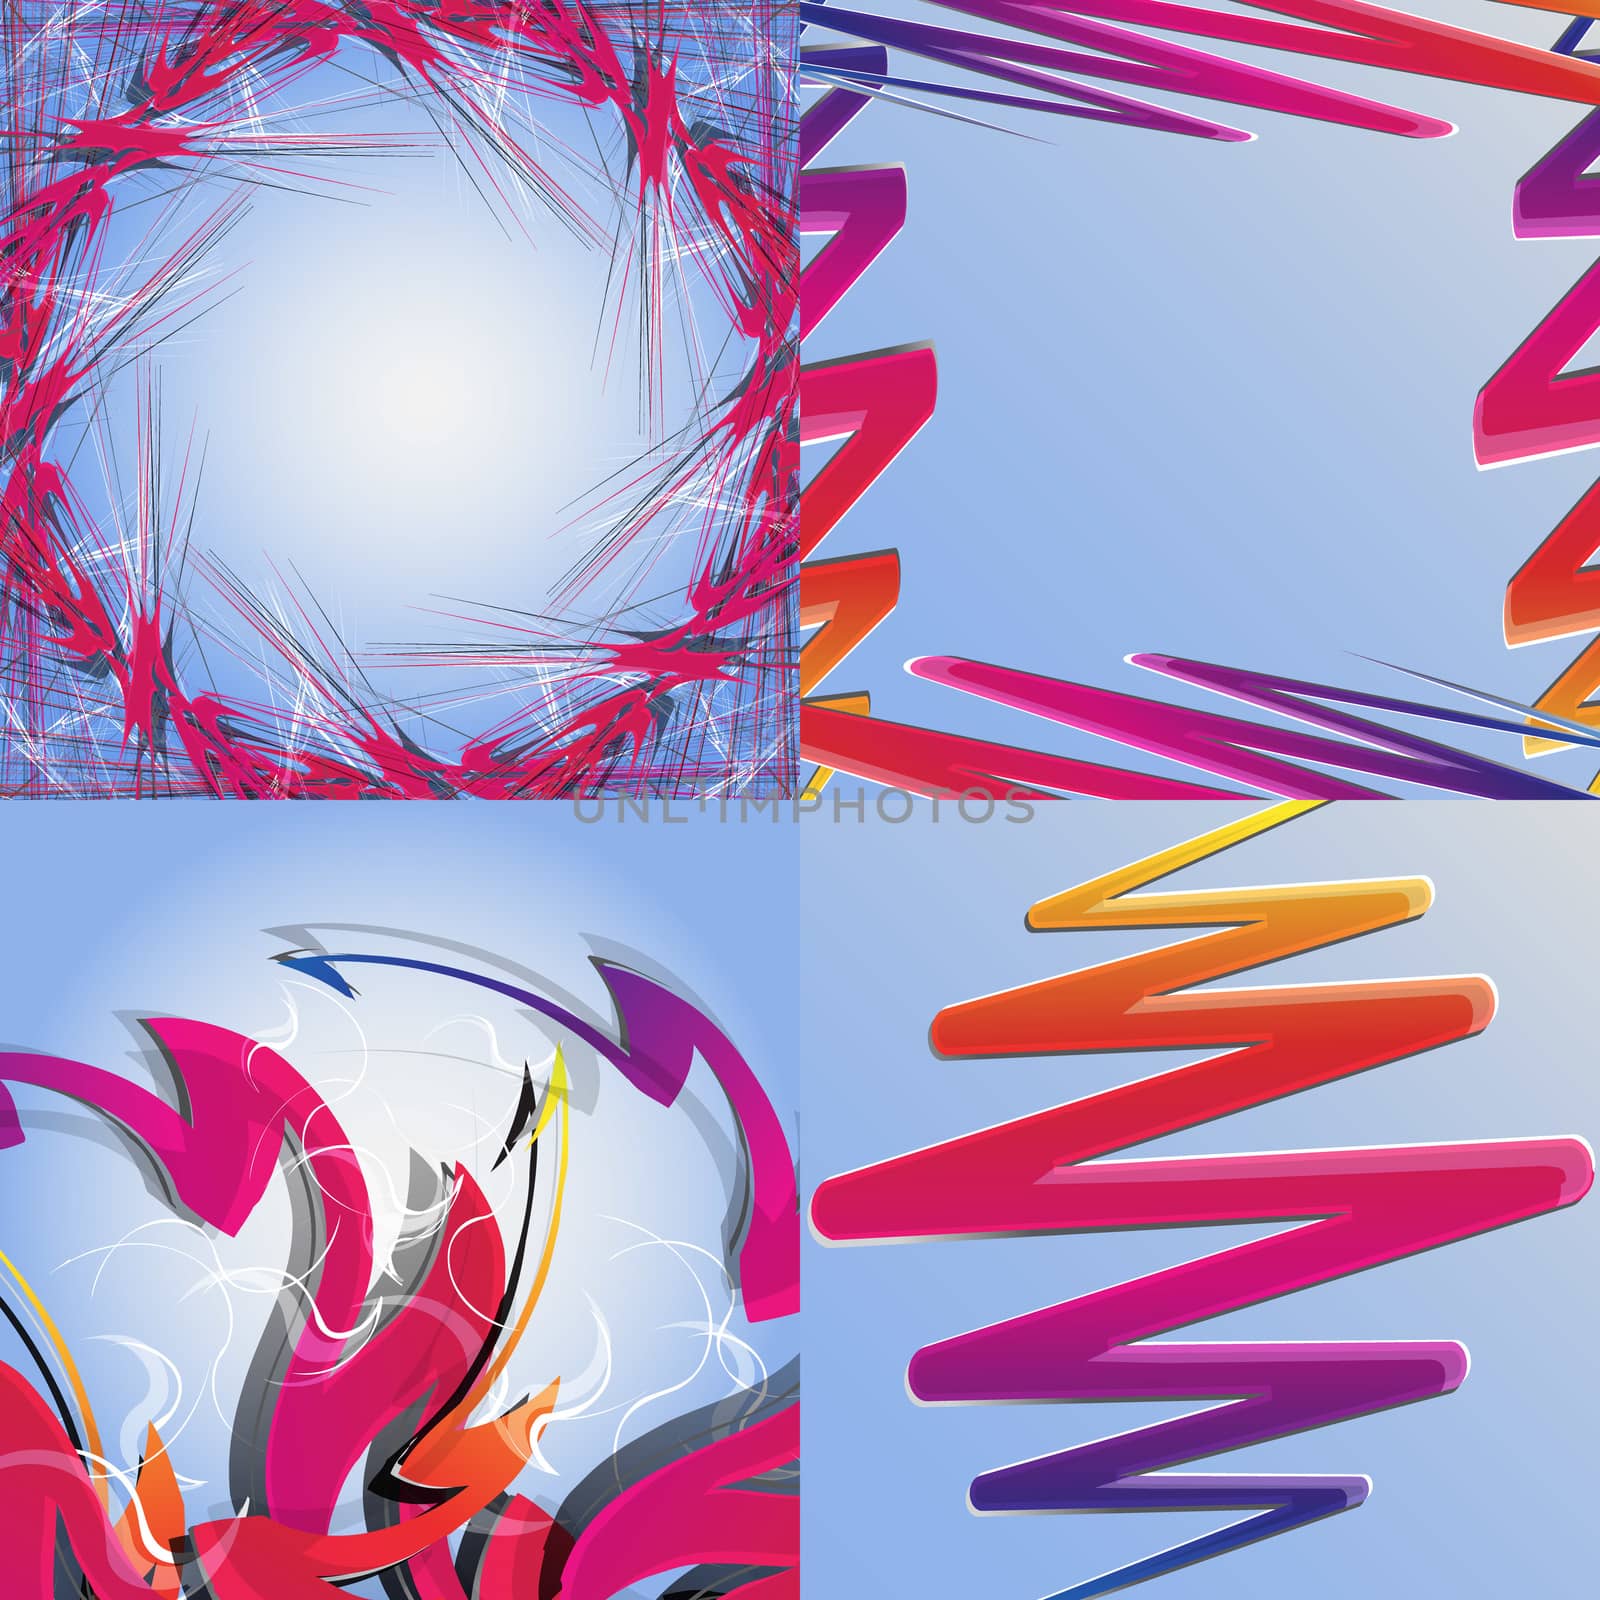 Set of abstract rainbow colored backgrounds with swirl.  Illustration